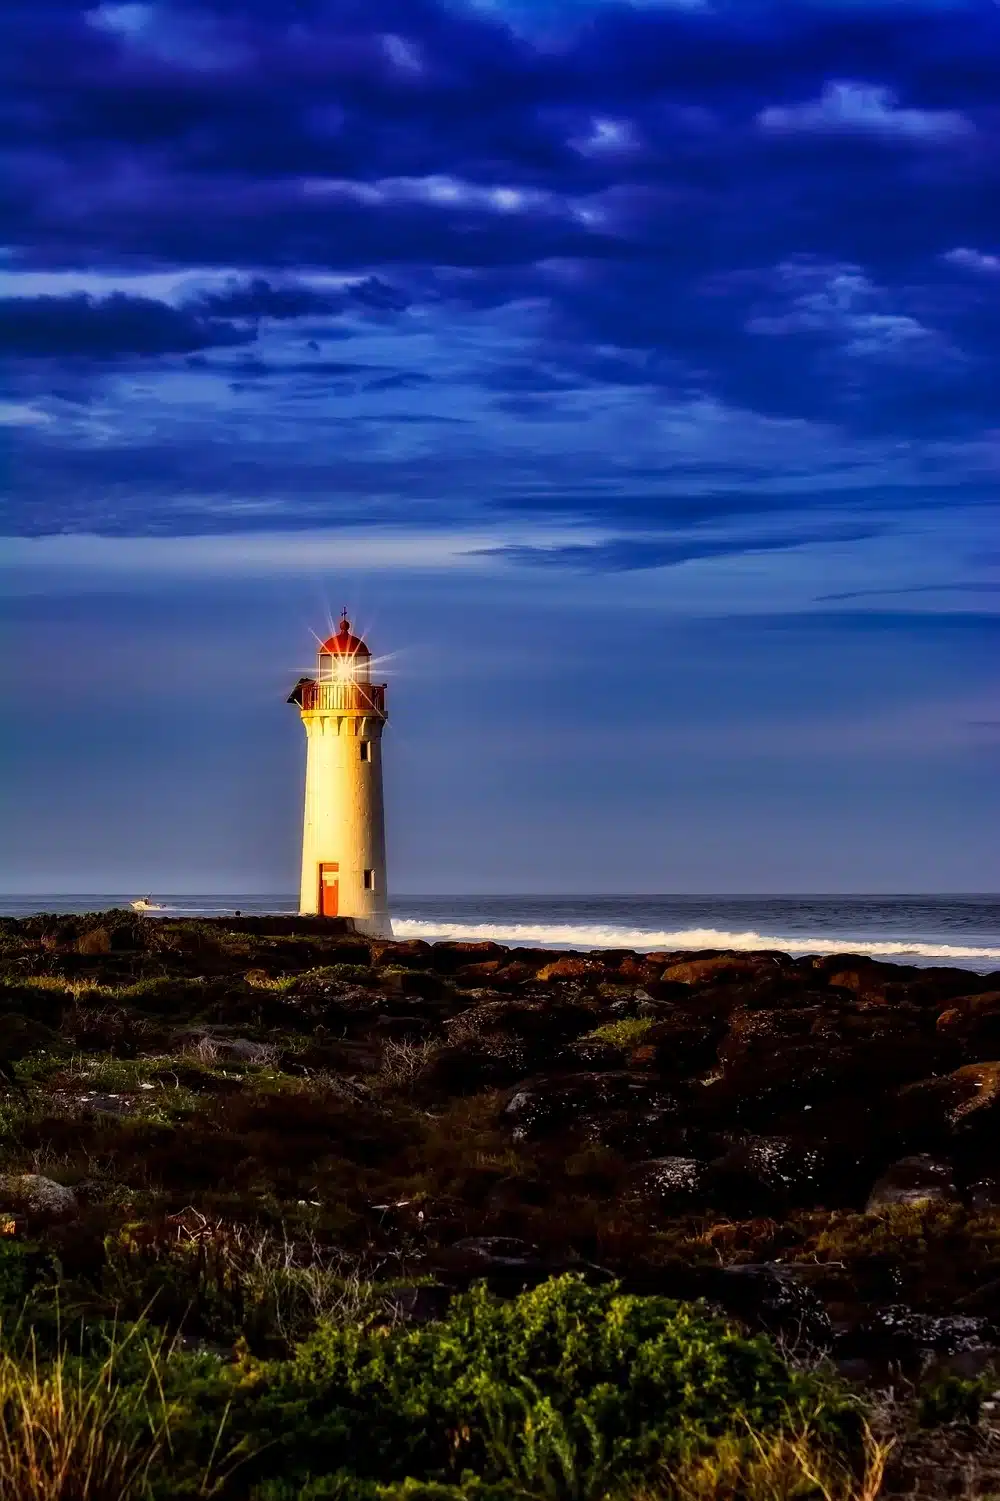 a lighthouse with its lamp turned on in an early evening